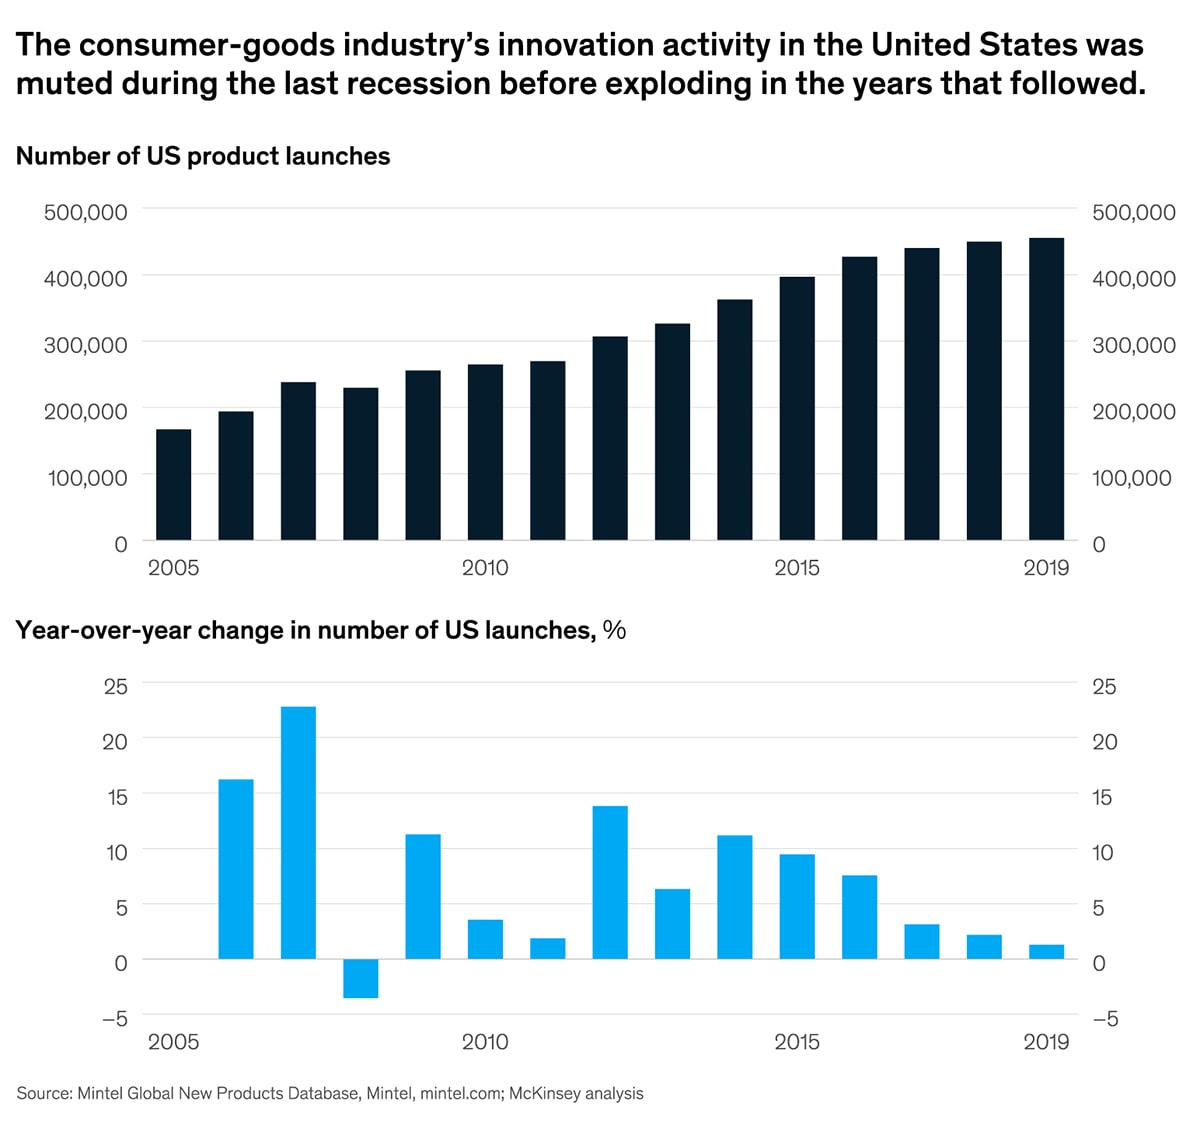 The last recession saw an innovation slowdown in consumer goods